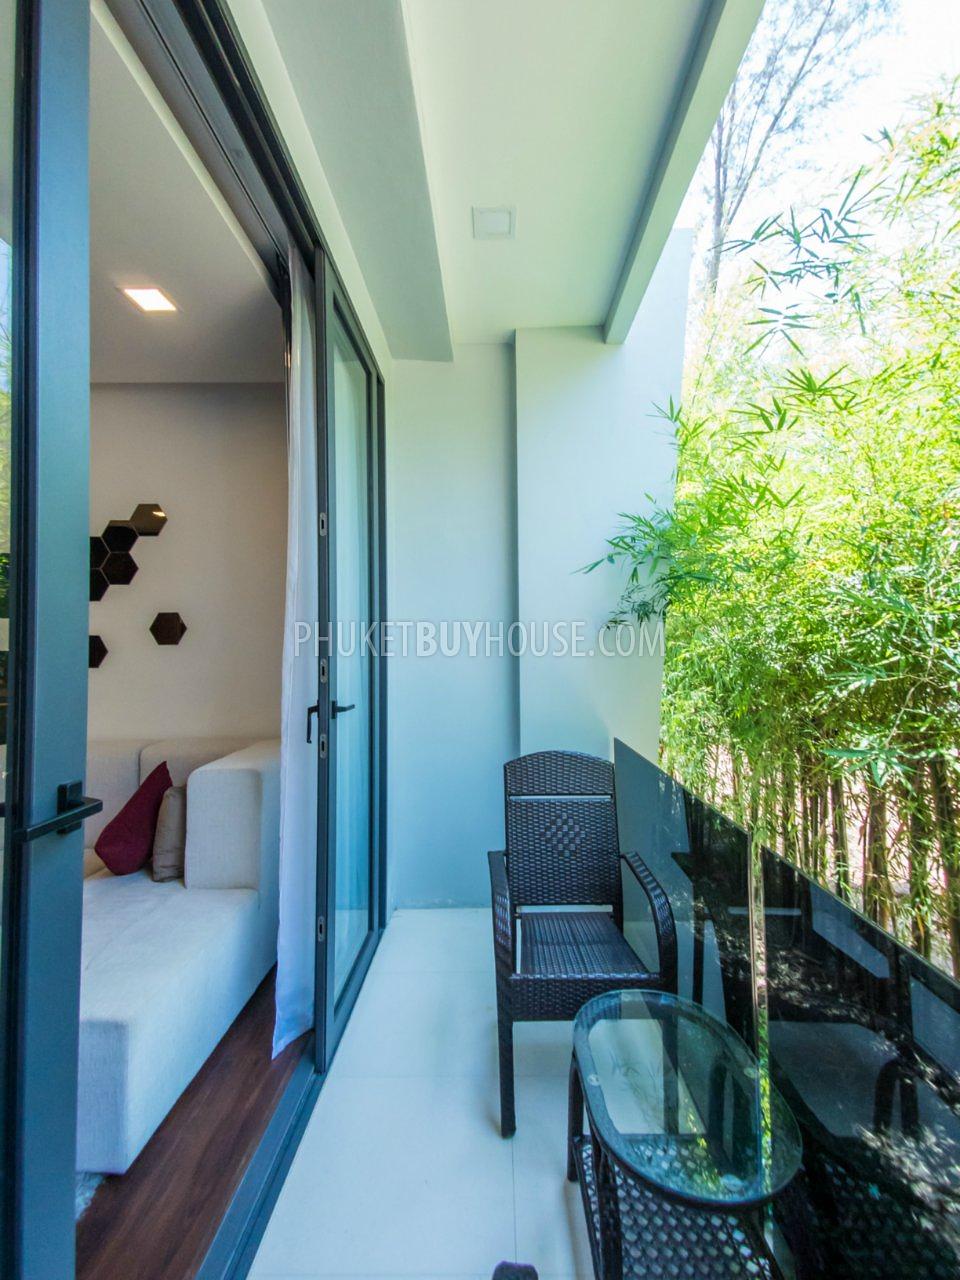 BAN5753: Spectacular 2-Bedroom Apartment in a premium location in Bang Tao Beach. Photo #26